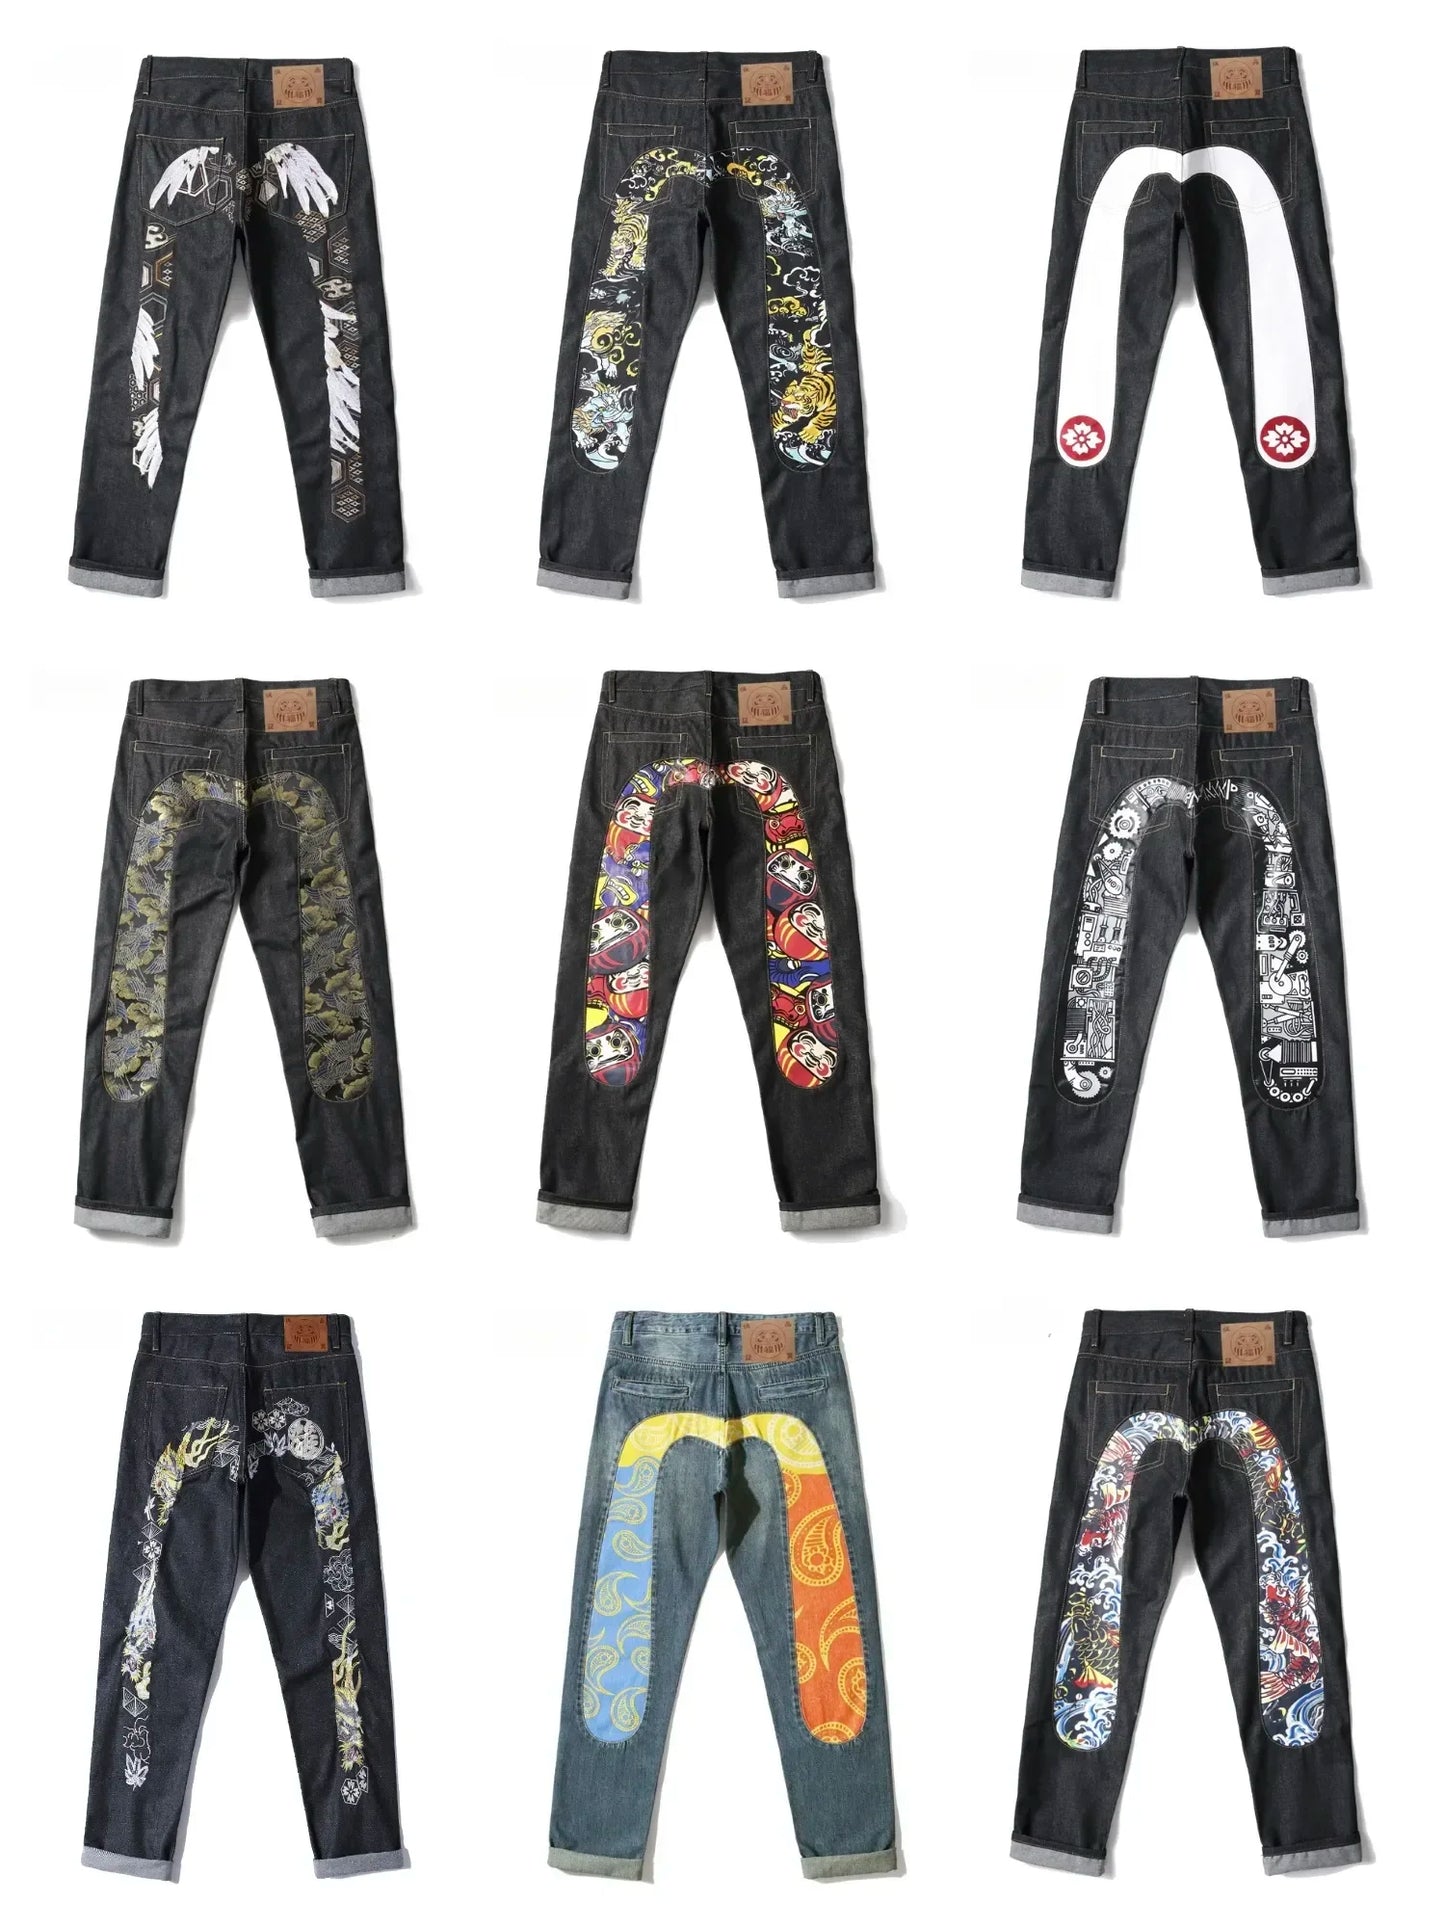 New Japanese Hipster Retro Hip-hop Fashion Print Jeans High Street Leisure Slim Straight Embroidery Print Stitching Trousers